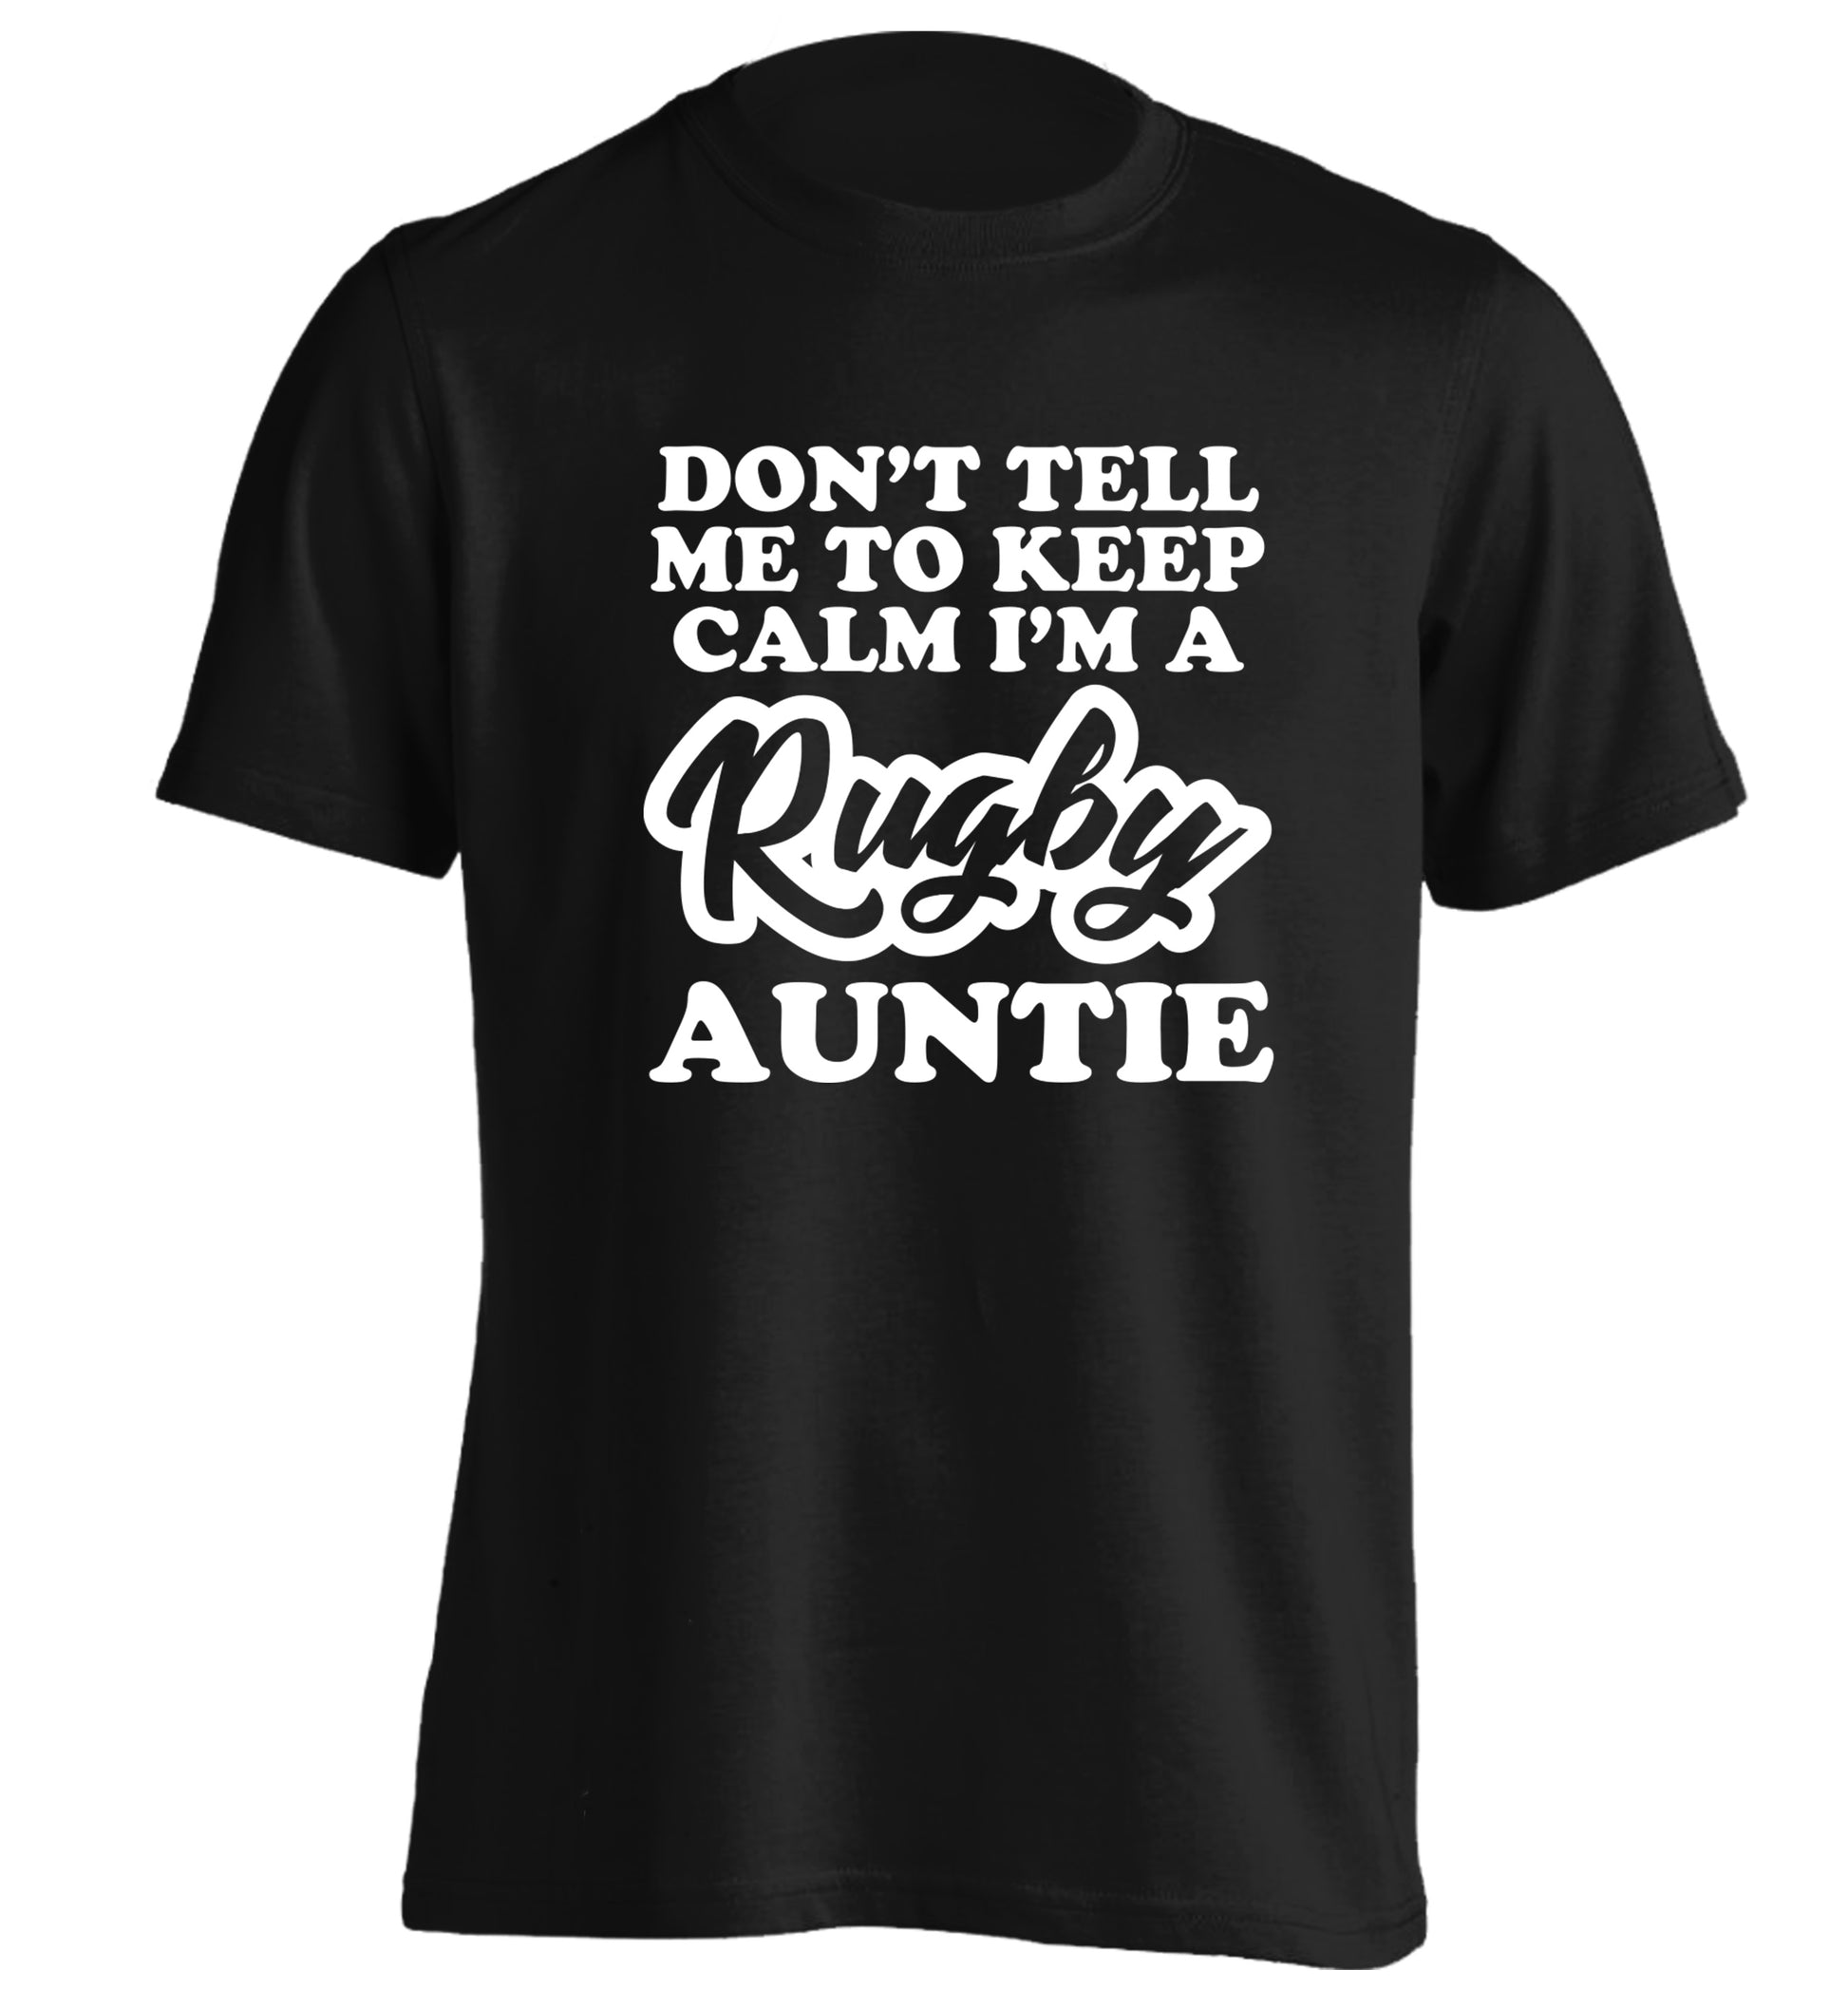 Don't tell me keep calm I'm a rugby auntie adults unisex black Tshirt 2XL